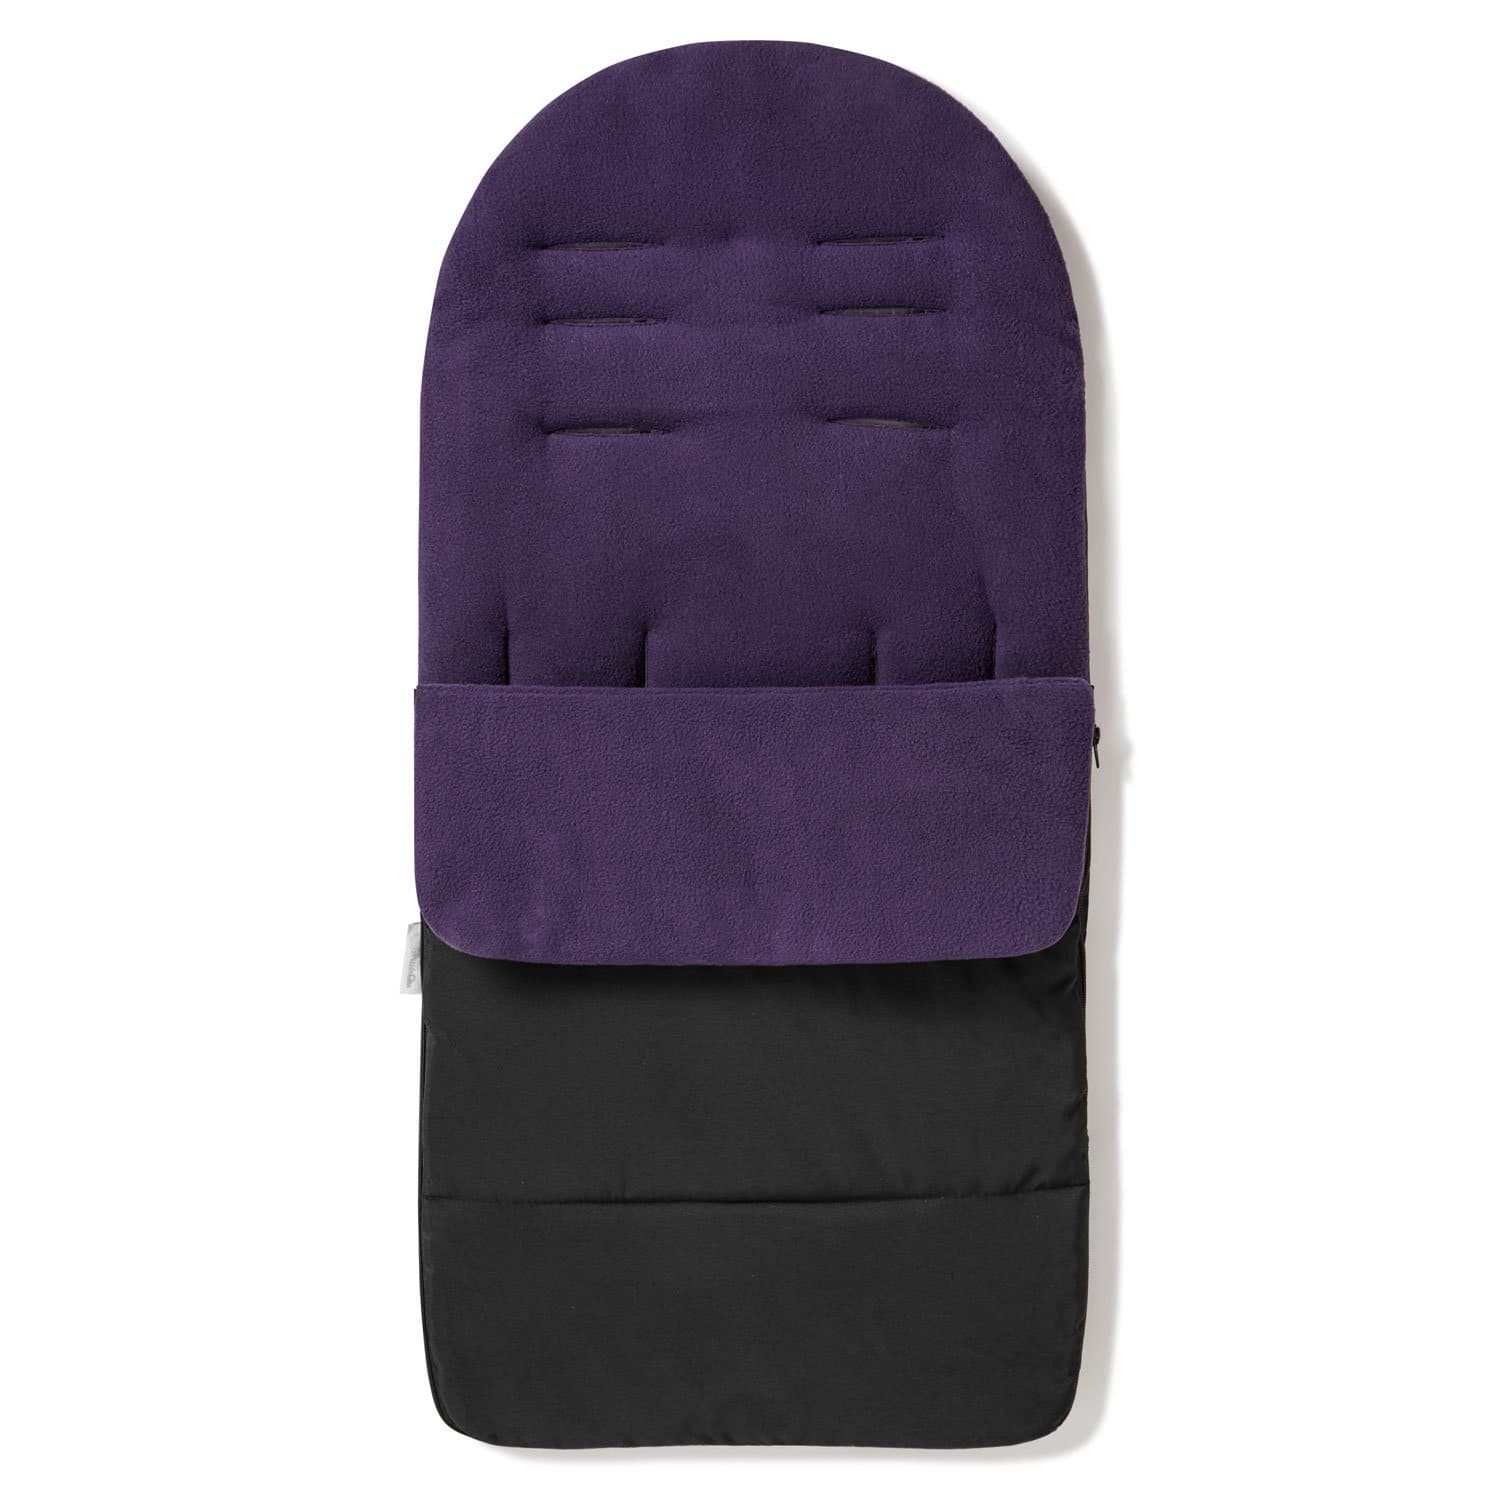 Premium Footmuff / Cosy Toes Compatible with Emmaljunga - Plum Purple / Fits All Models | For Your Little One